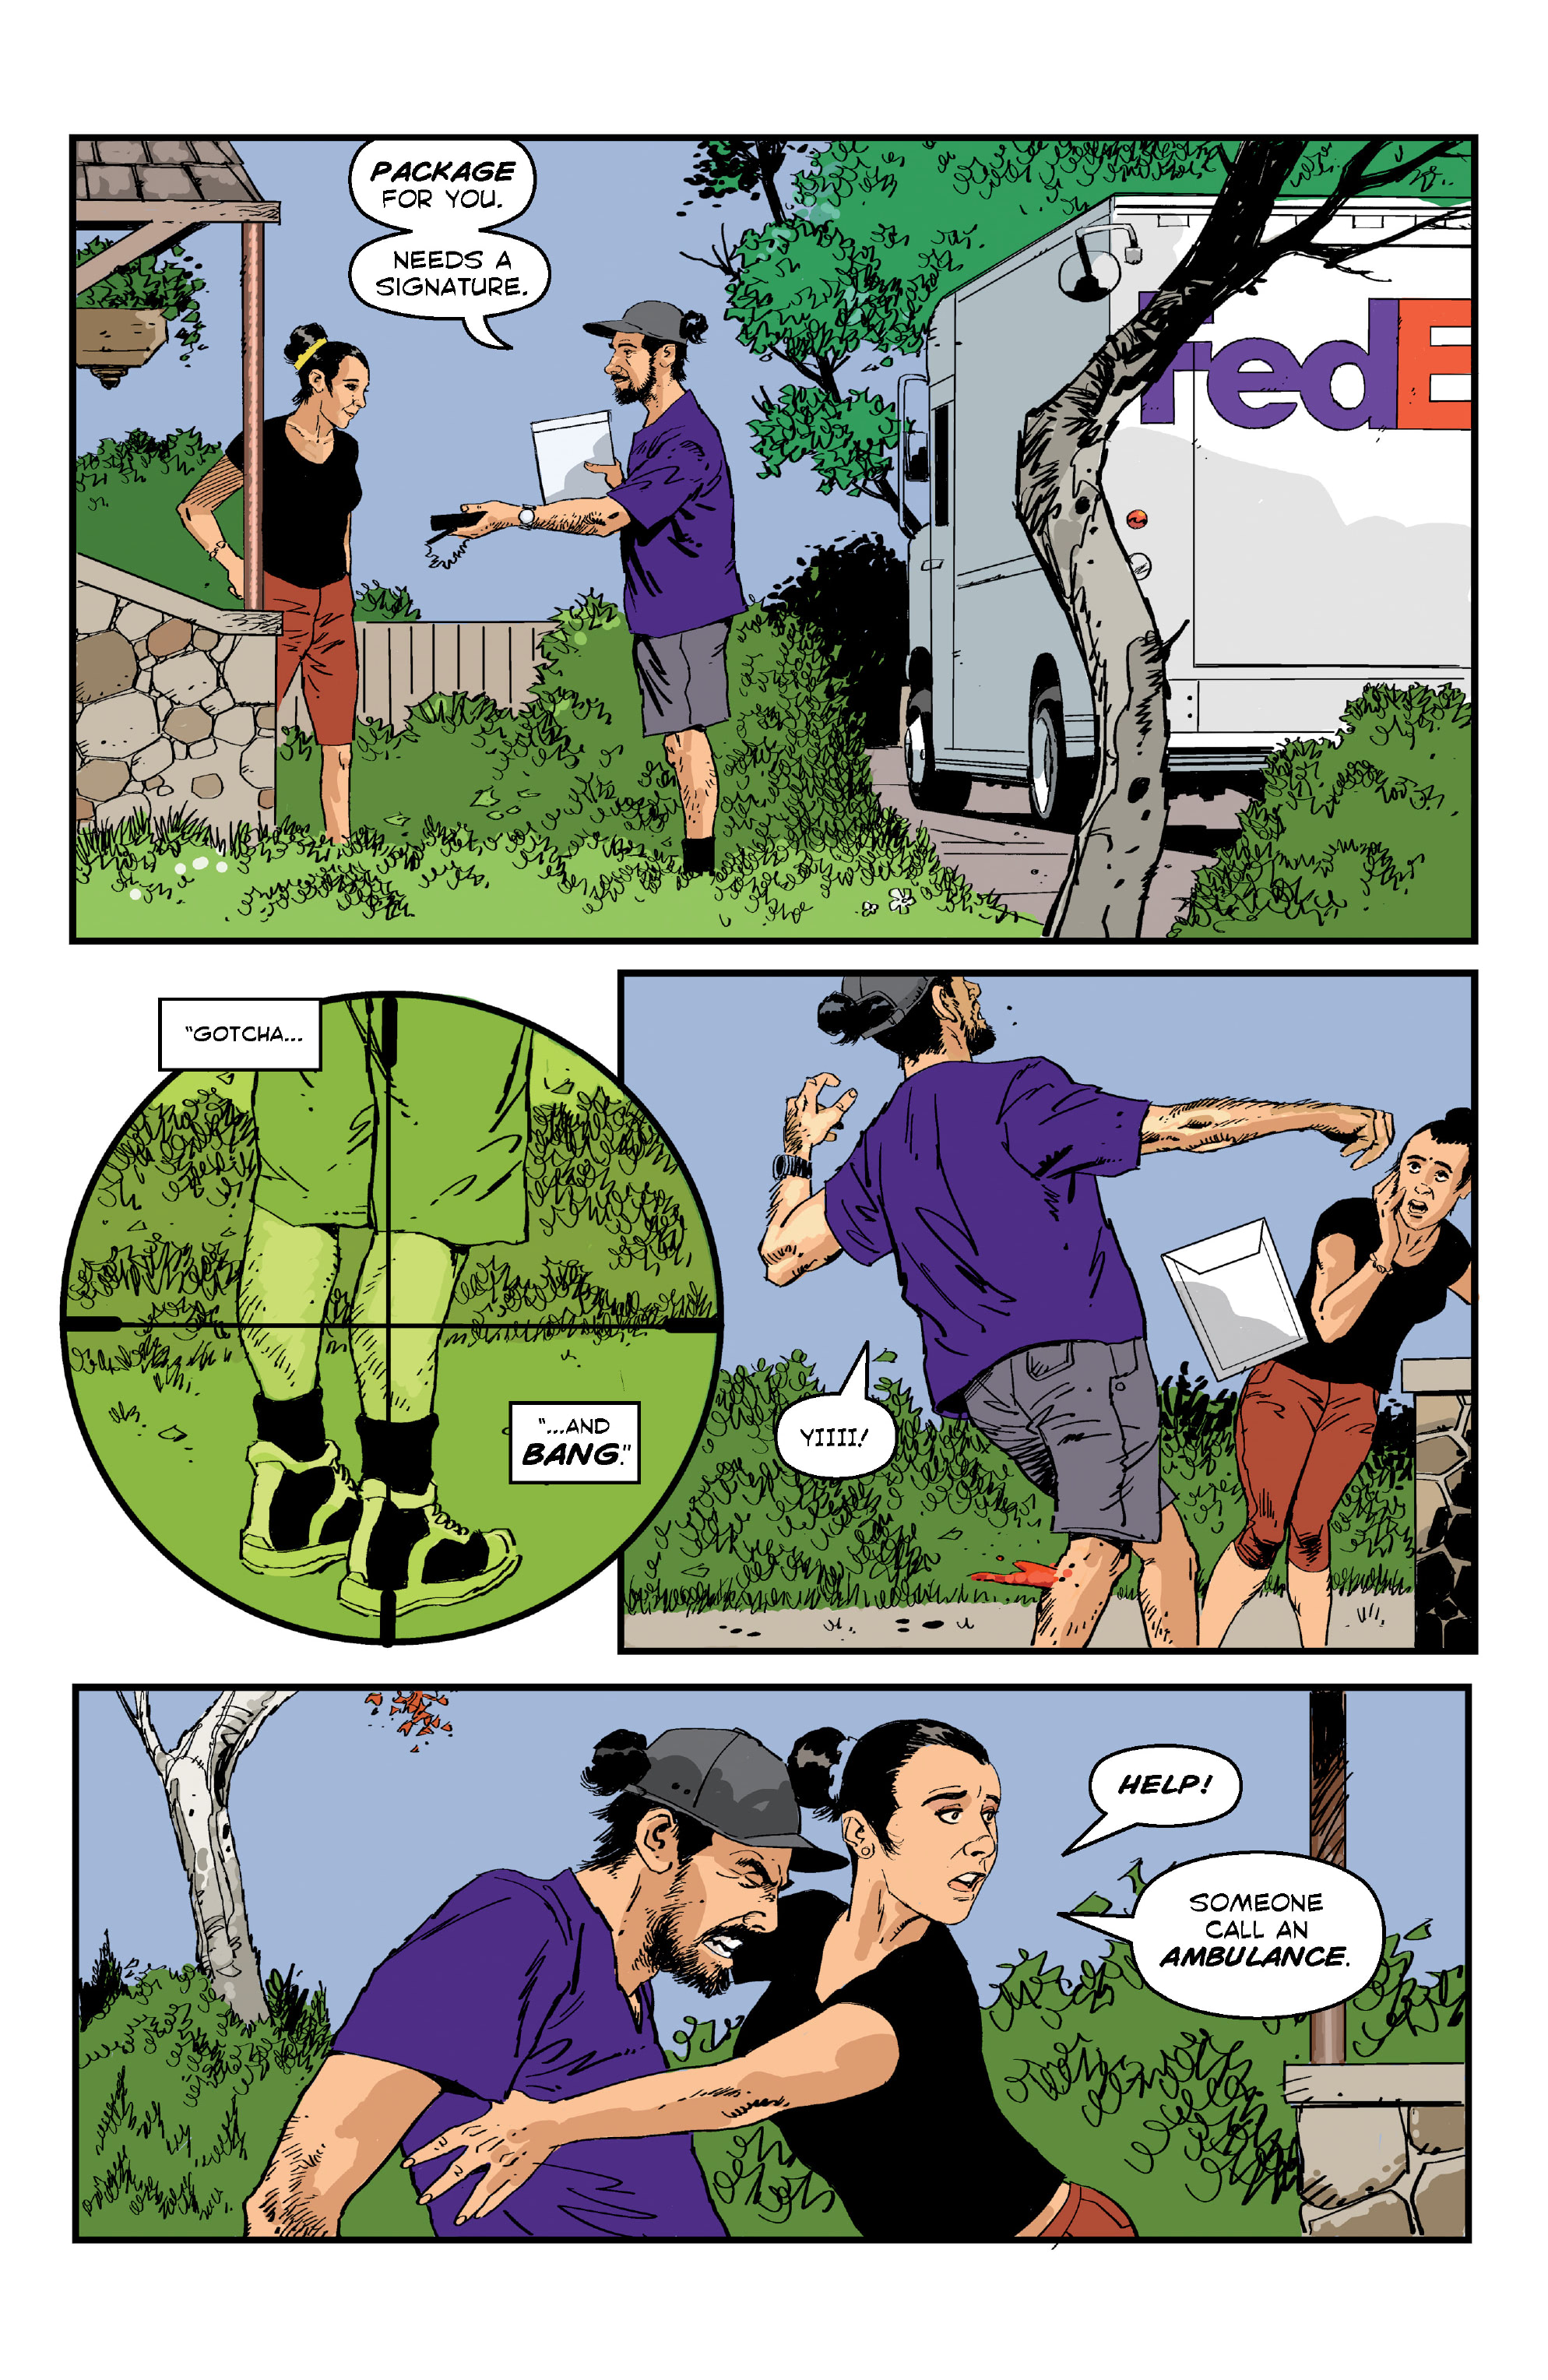 Resident Alien: Your Ride's Here (2020-): Chapter 1 - Page 3